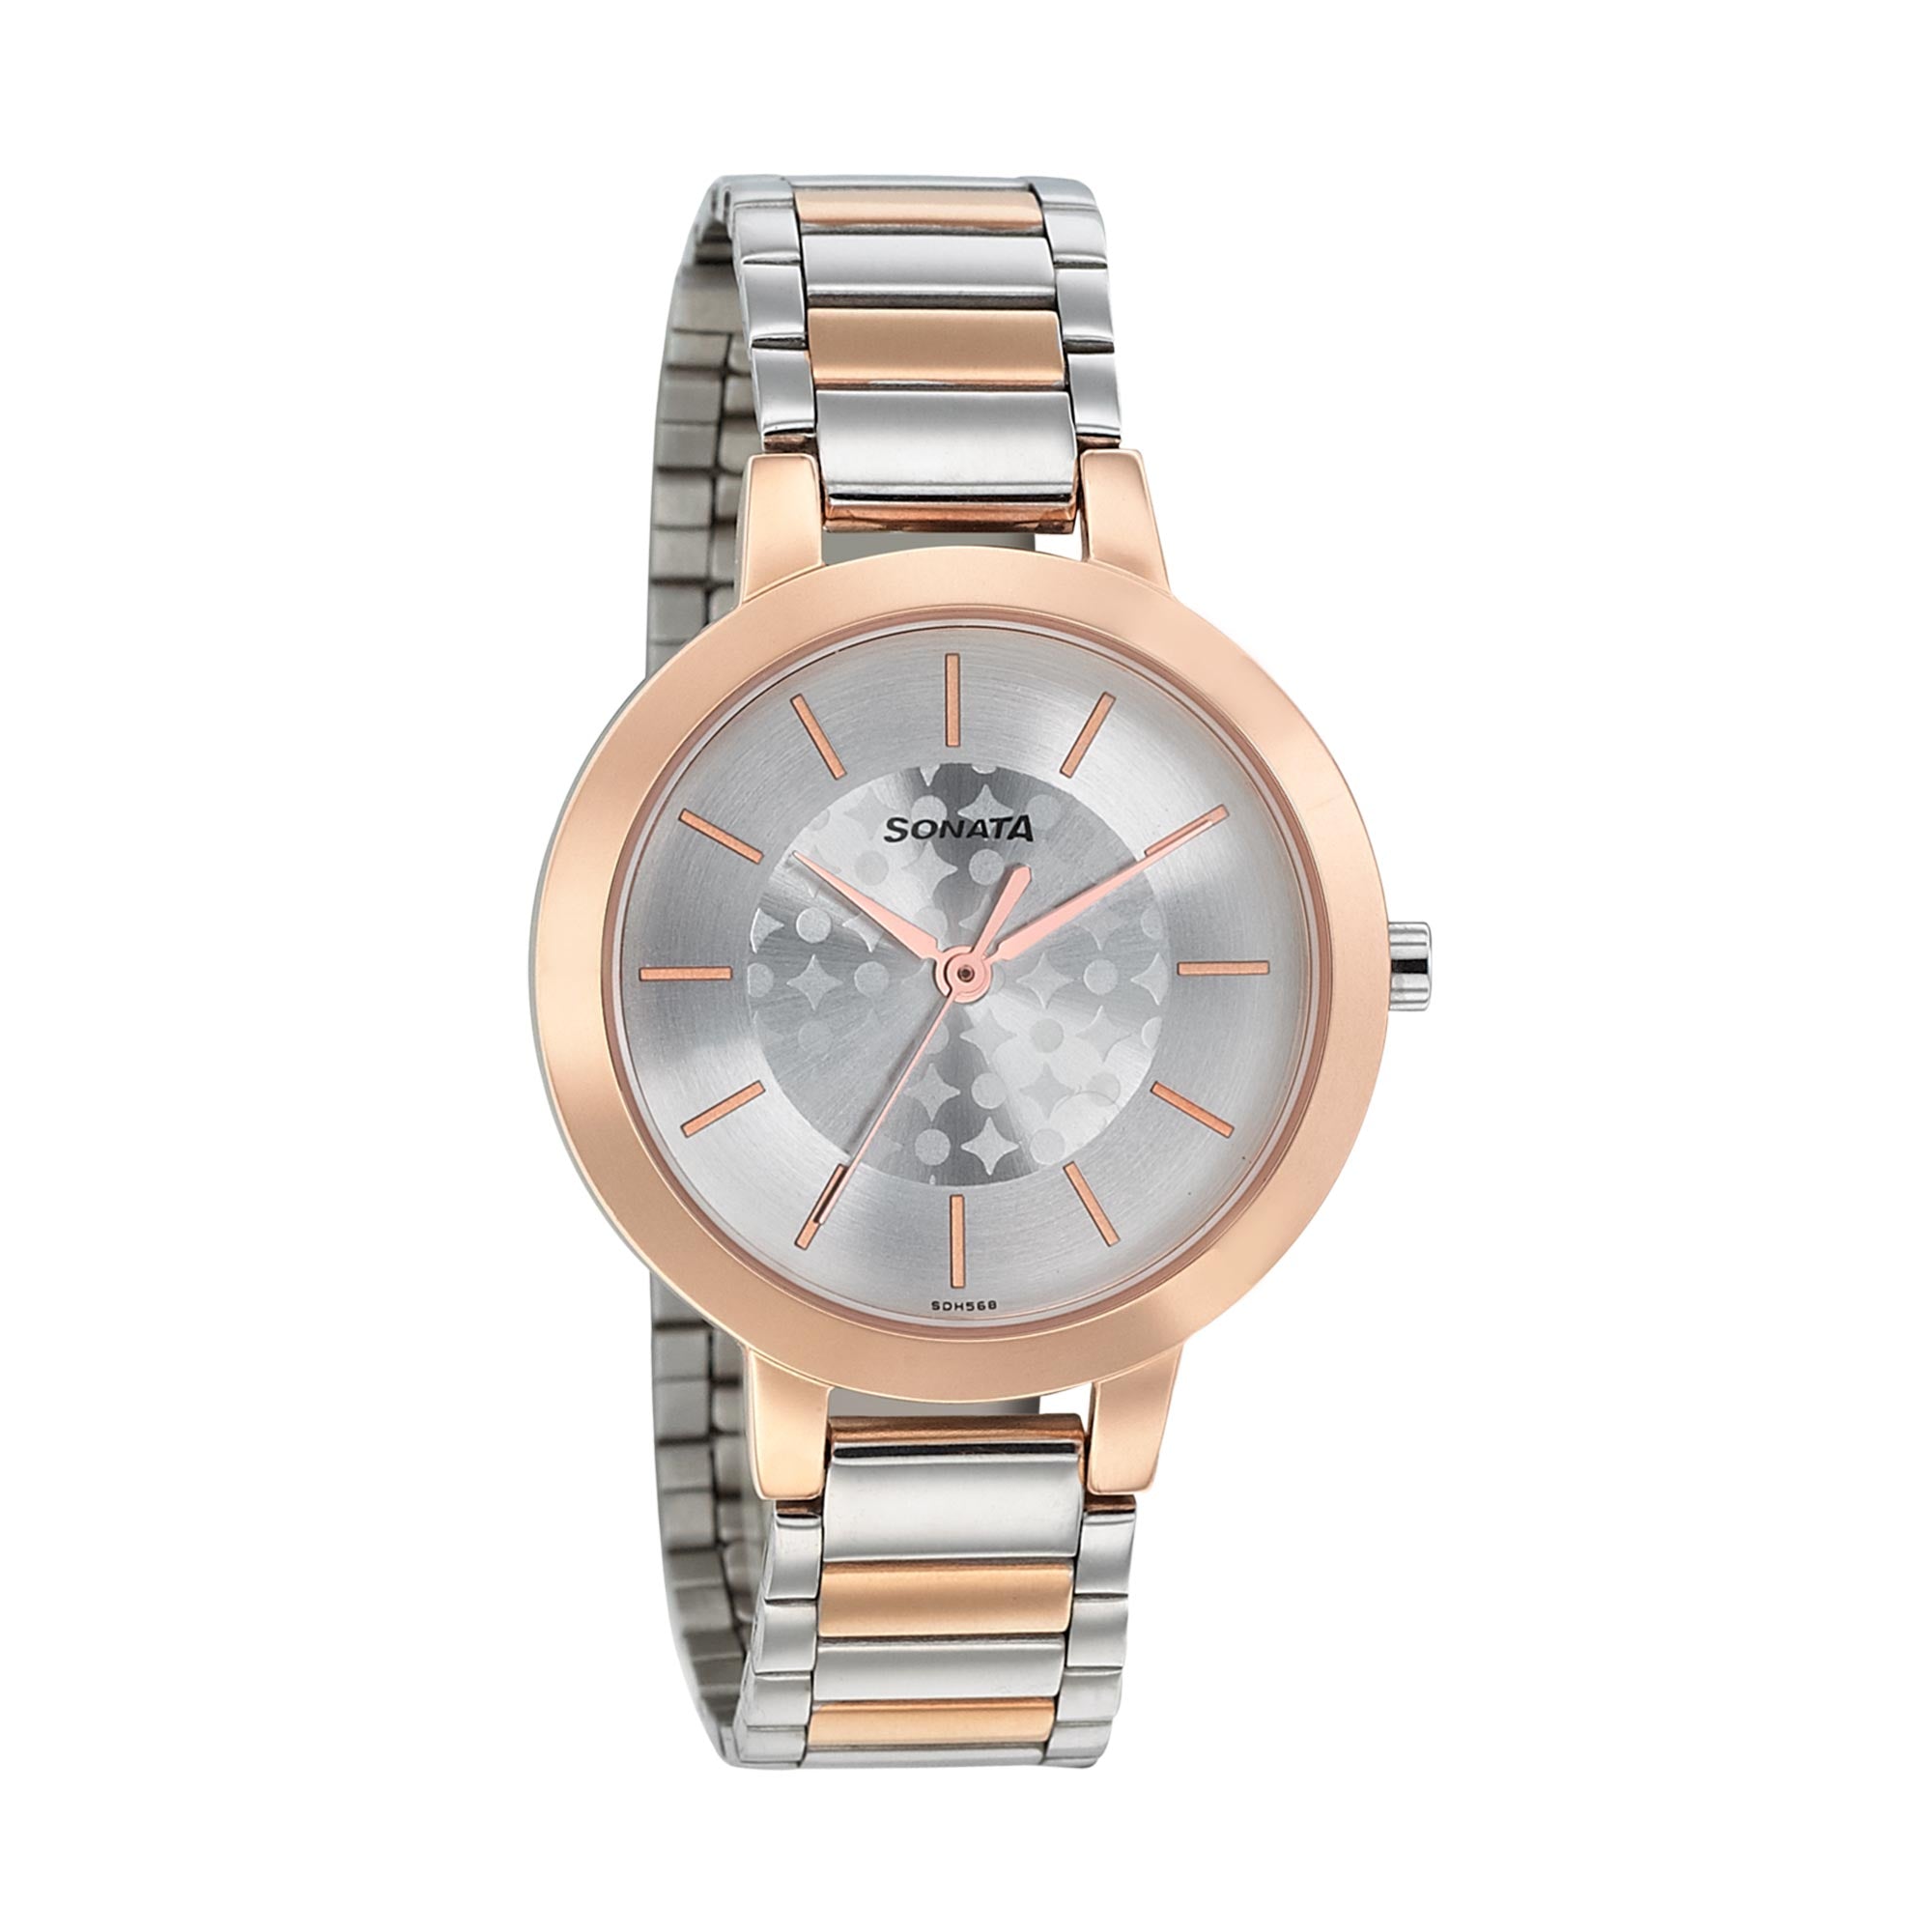 Sonata Blush Silver Dial Women Watch With Stainless Steel Strap